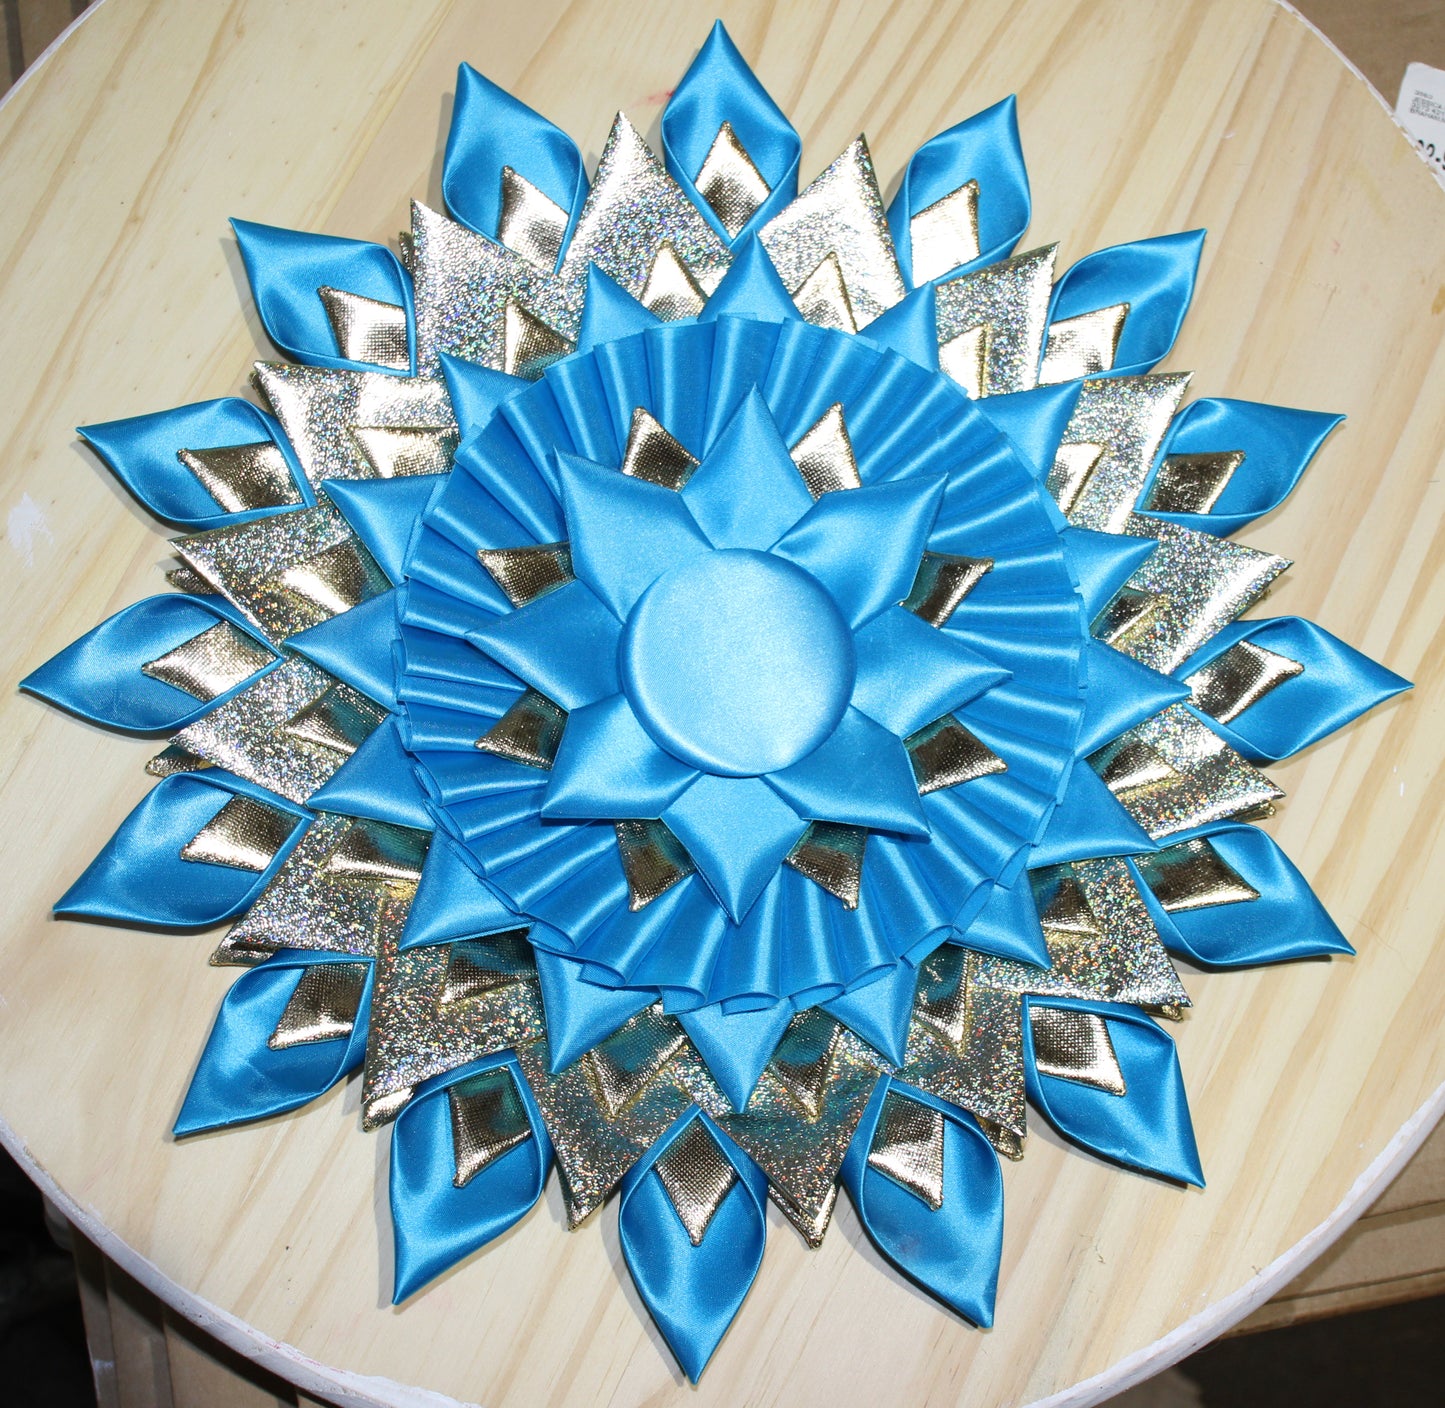 13.5" Turquoise Rosette with 5x 36" streamers